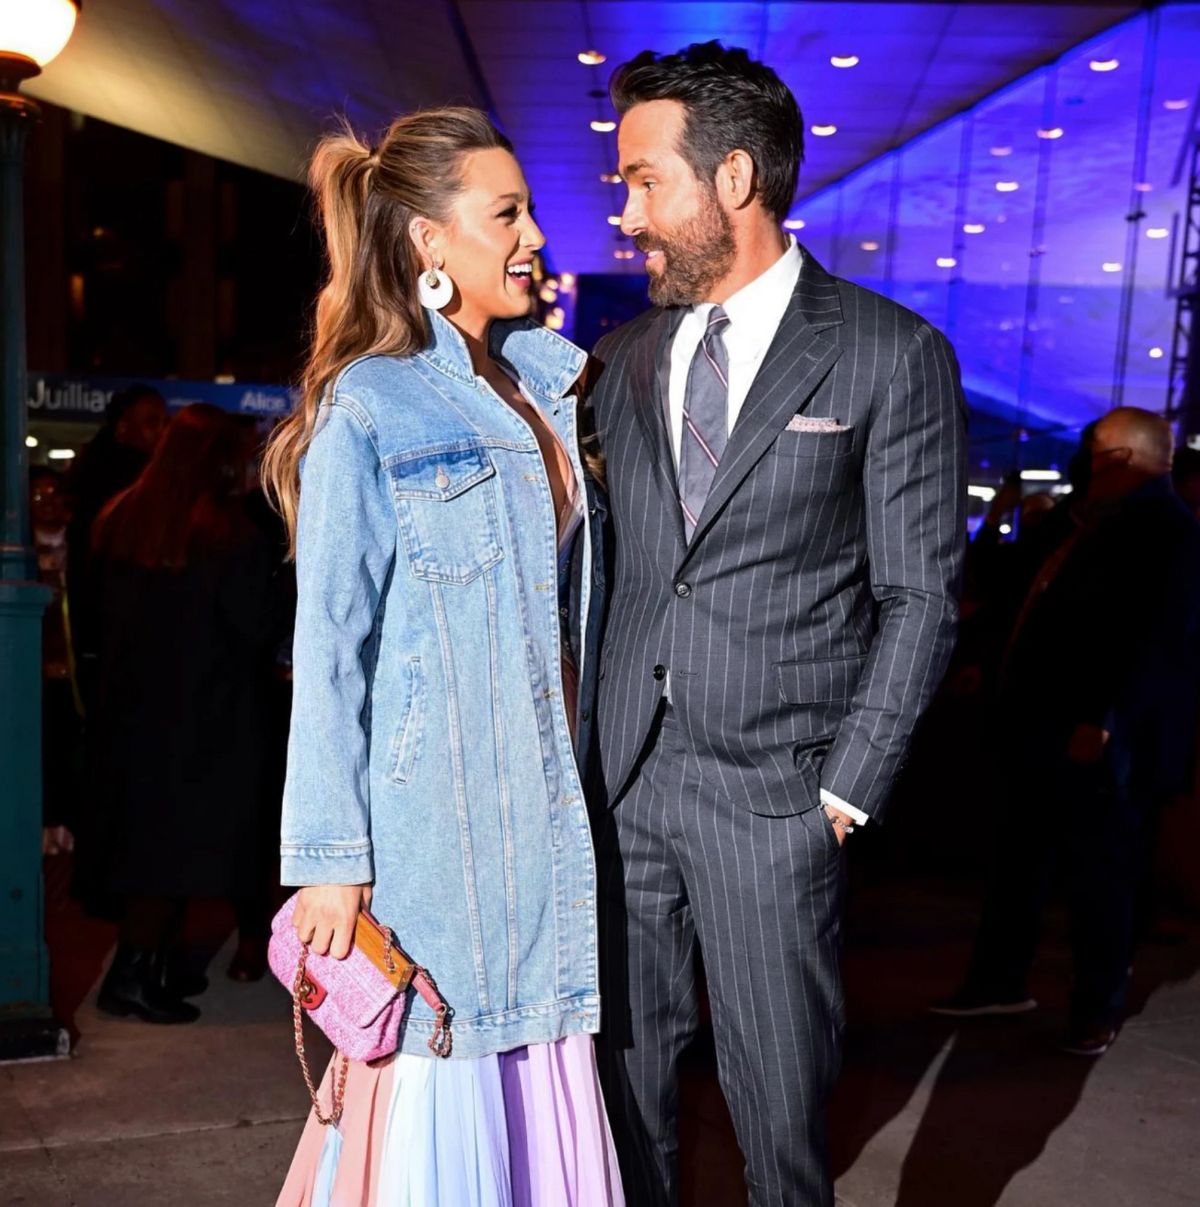 How Ryan Reynolds and Blake Lively's net worth jumped by 166% in a single  deal? The Deadpool star just bagged $300M from T-Mobile's latest deal.  While his stunning wife has her own